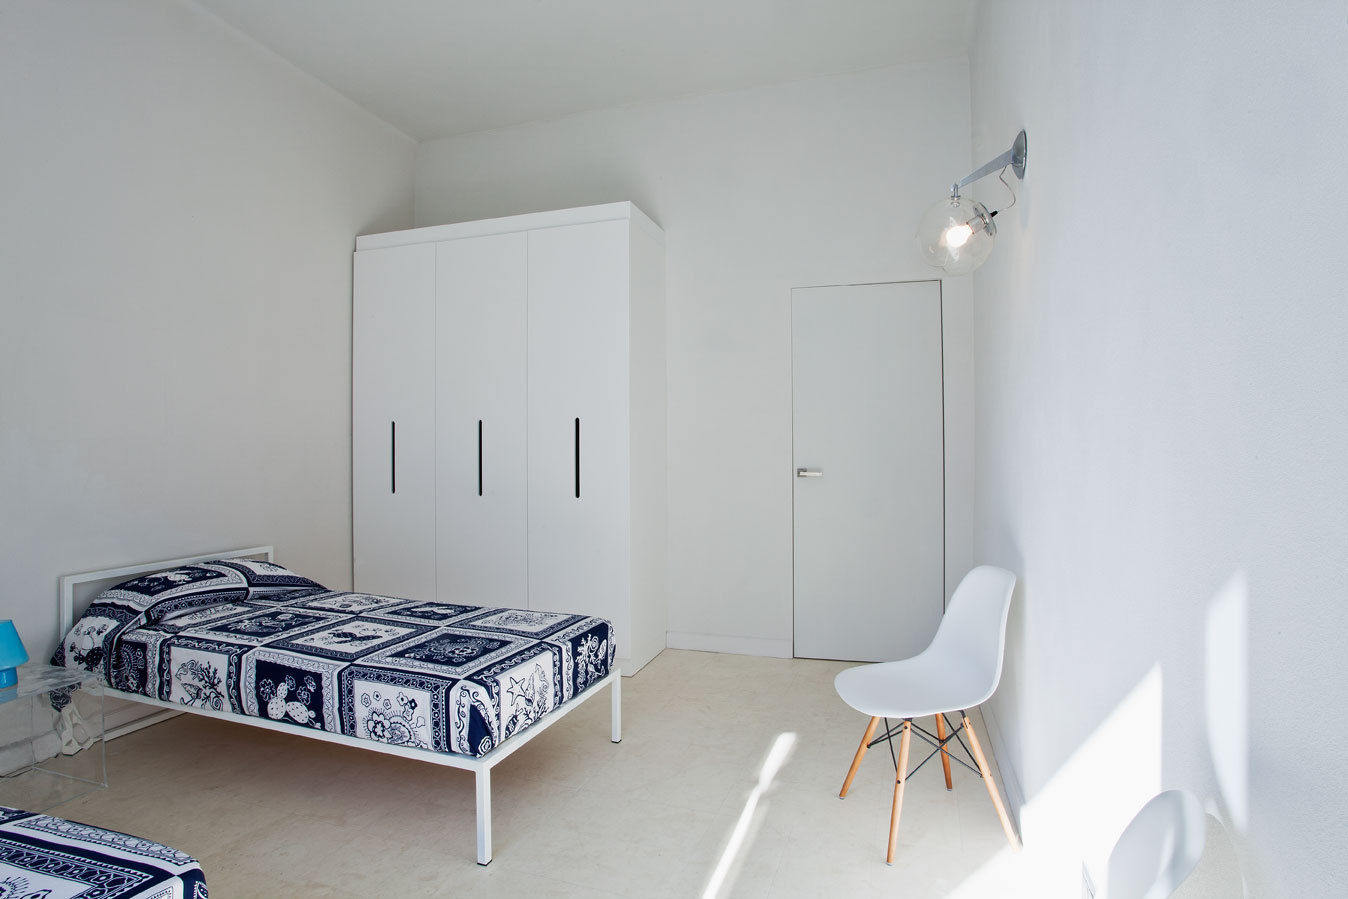 HOUSE FOR HOLIDAYS, PAOLO FRELLO & PARTNERS PAOLO FRELLO & PARTNERS Minimalistische Schlafzimmer